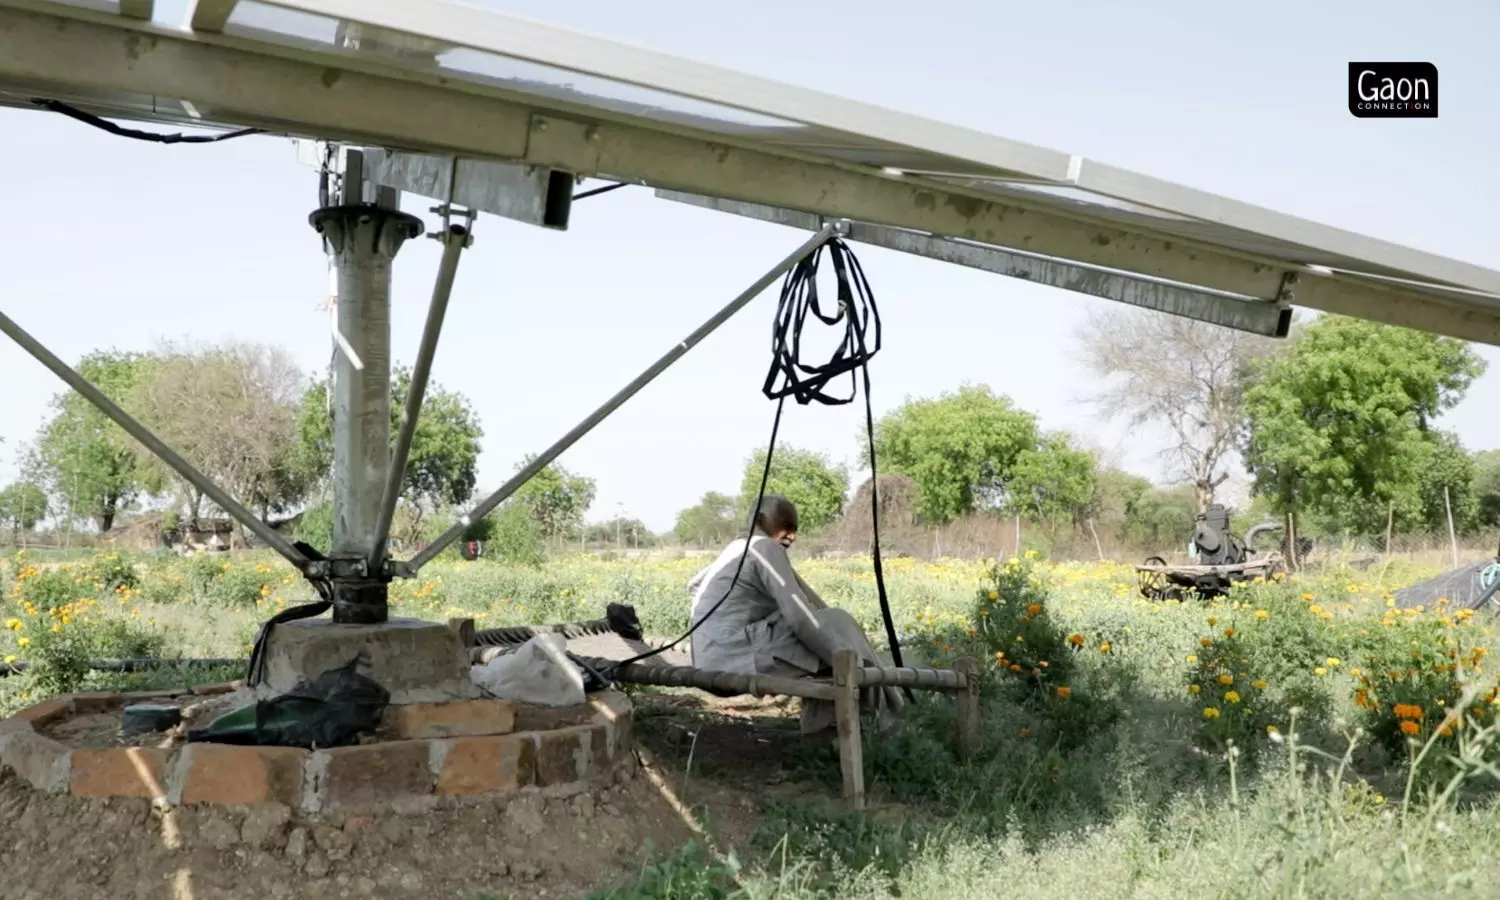 Six months in a year, solar pumps remain idle in Bundelkhand. Why not connect them to the grid?